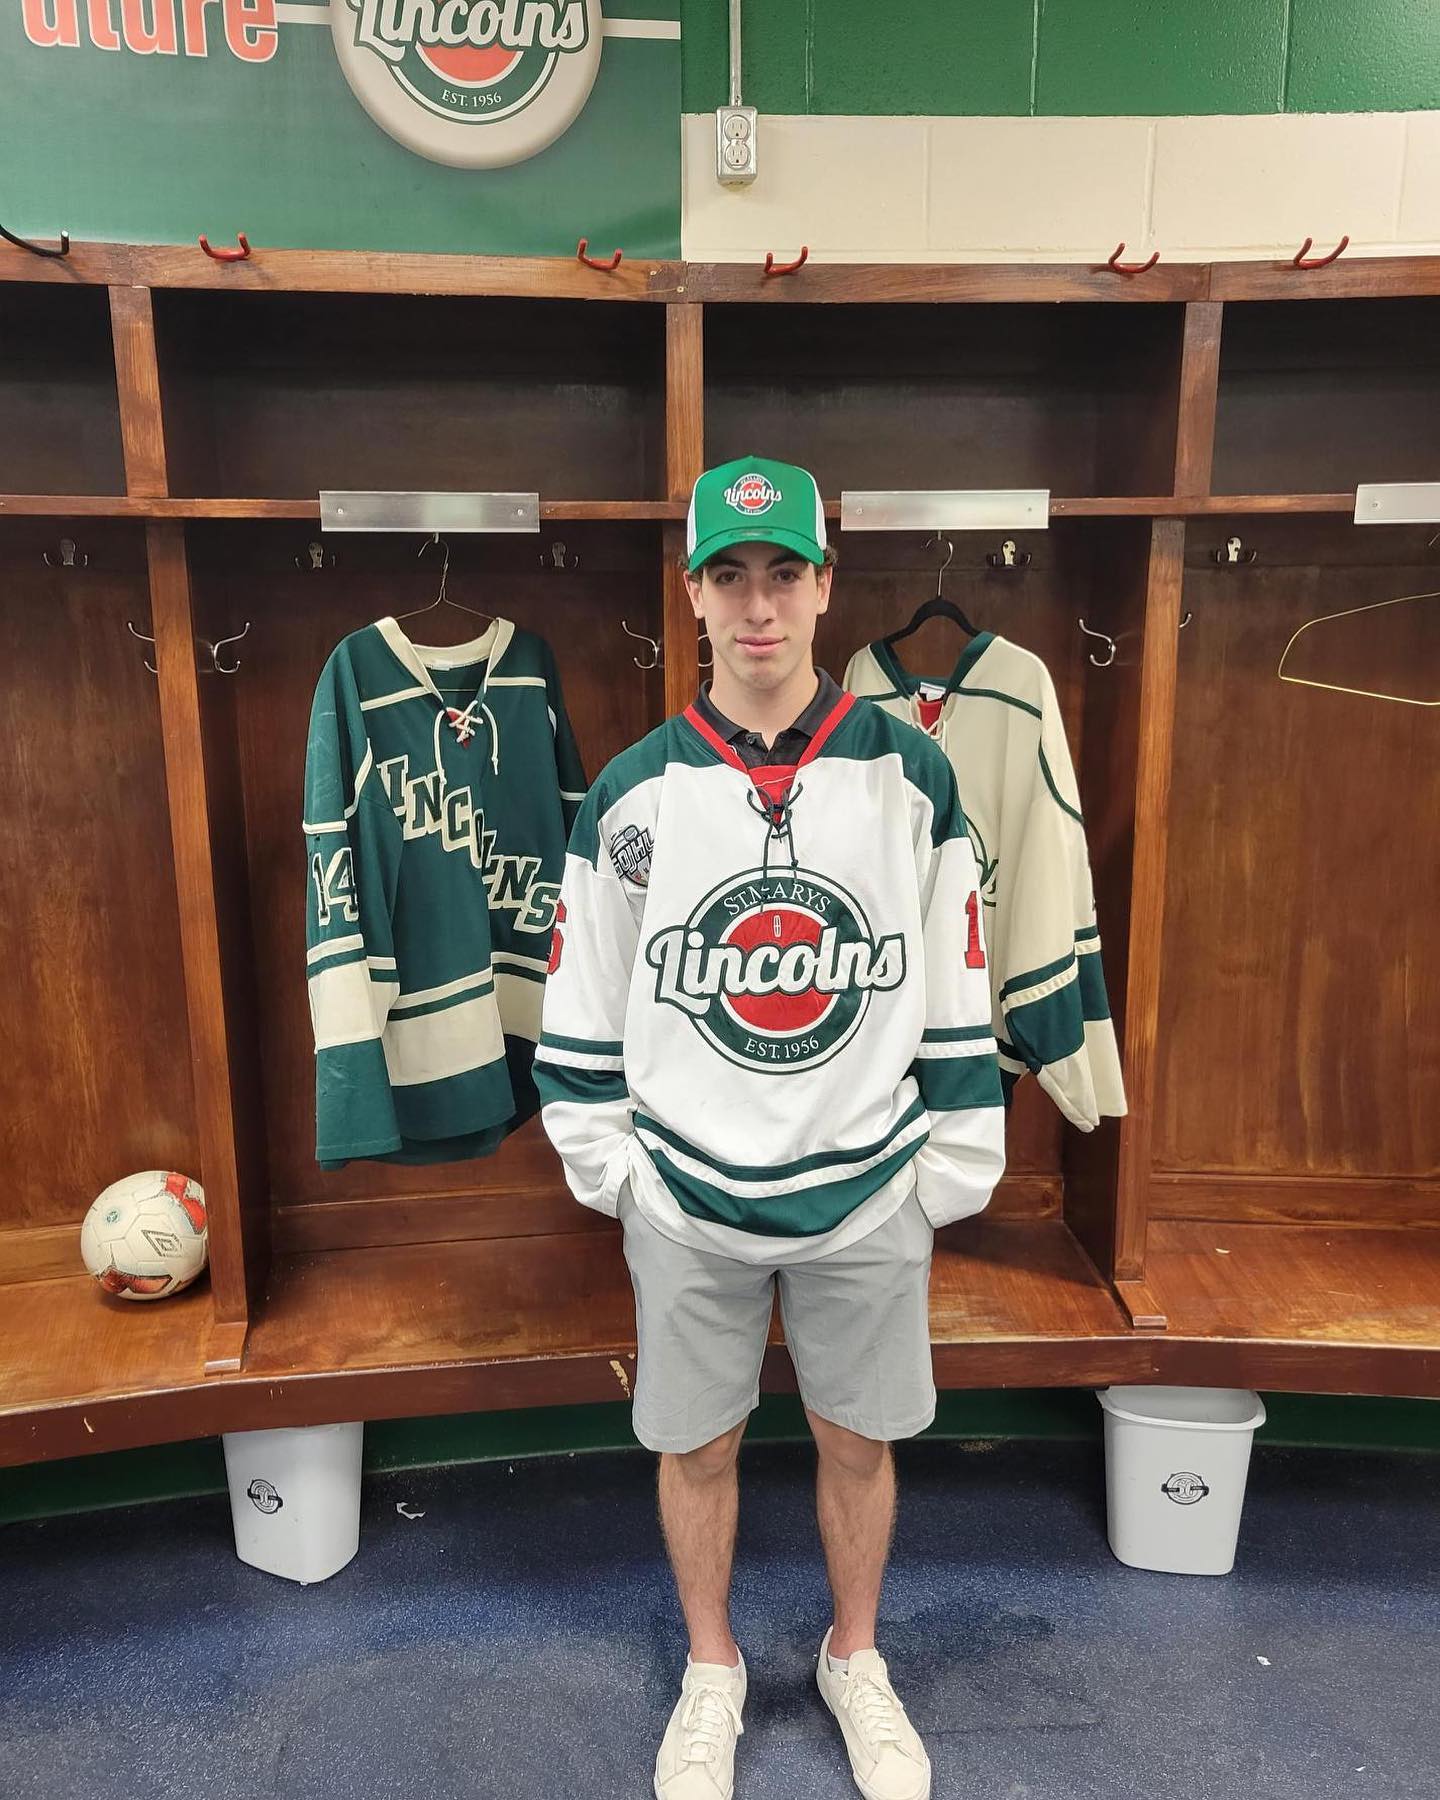 SIGNED - Lincs welcome FWD Matthew Prendergast to the Stonetown! Prendergast led the U18 Jr Knights last season in scoring, and AP’d for the Lincs #WeAreLincolns